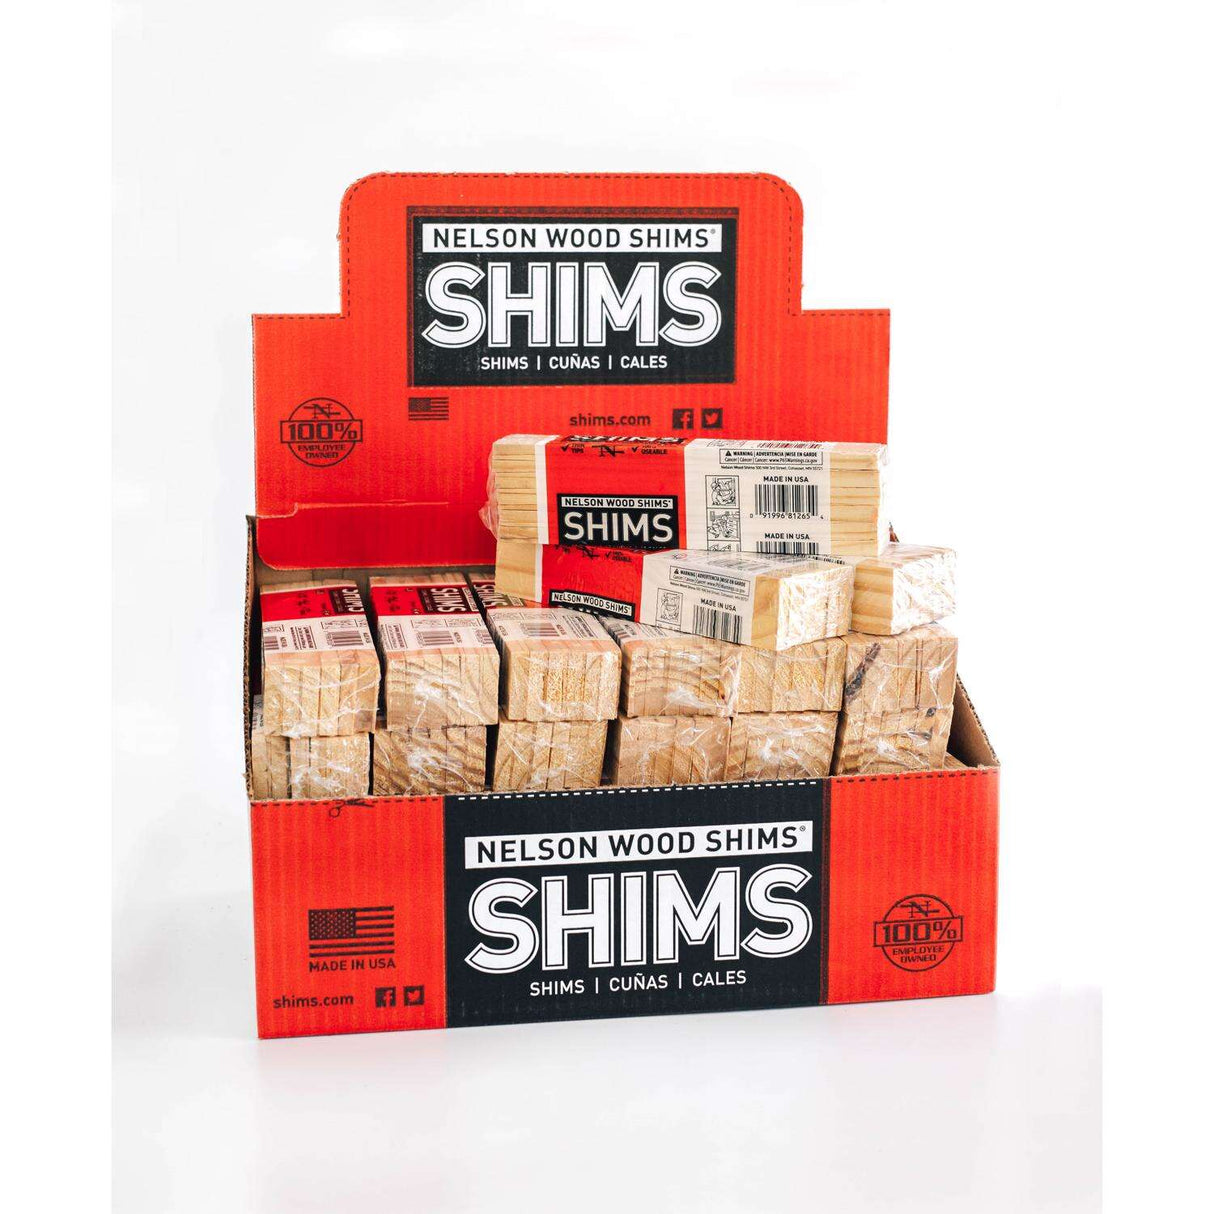 Nelson Wood Shims 0.3125-in x 1.375-in x 7.875-in 12-Pack Pine Wood Shim